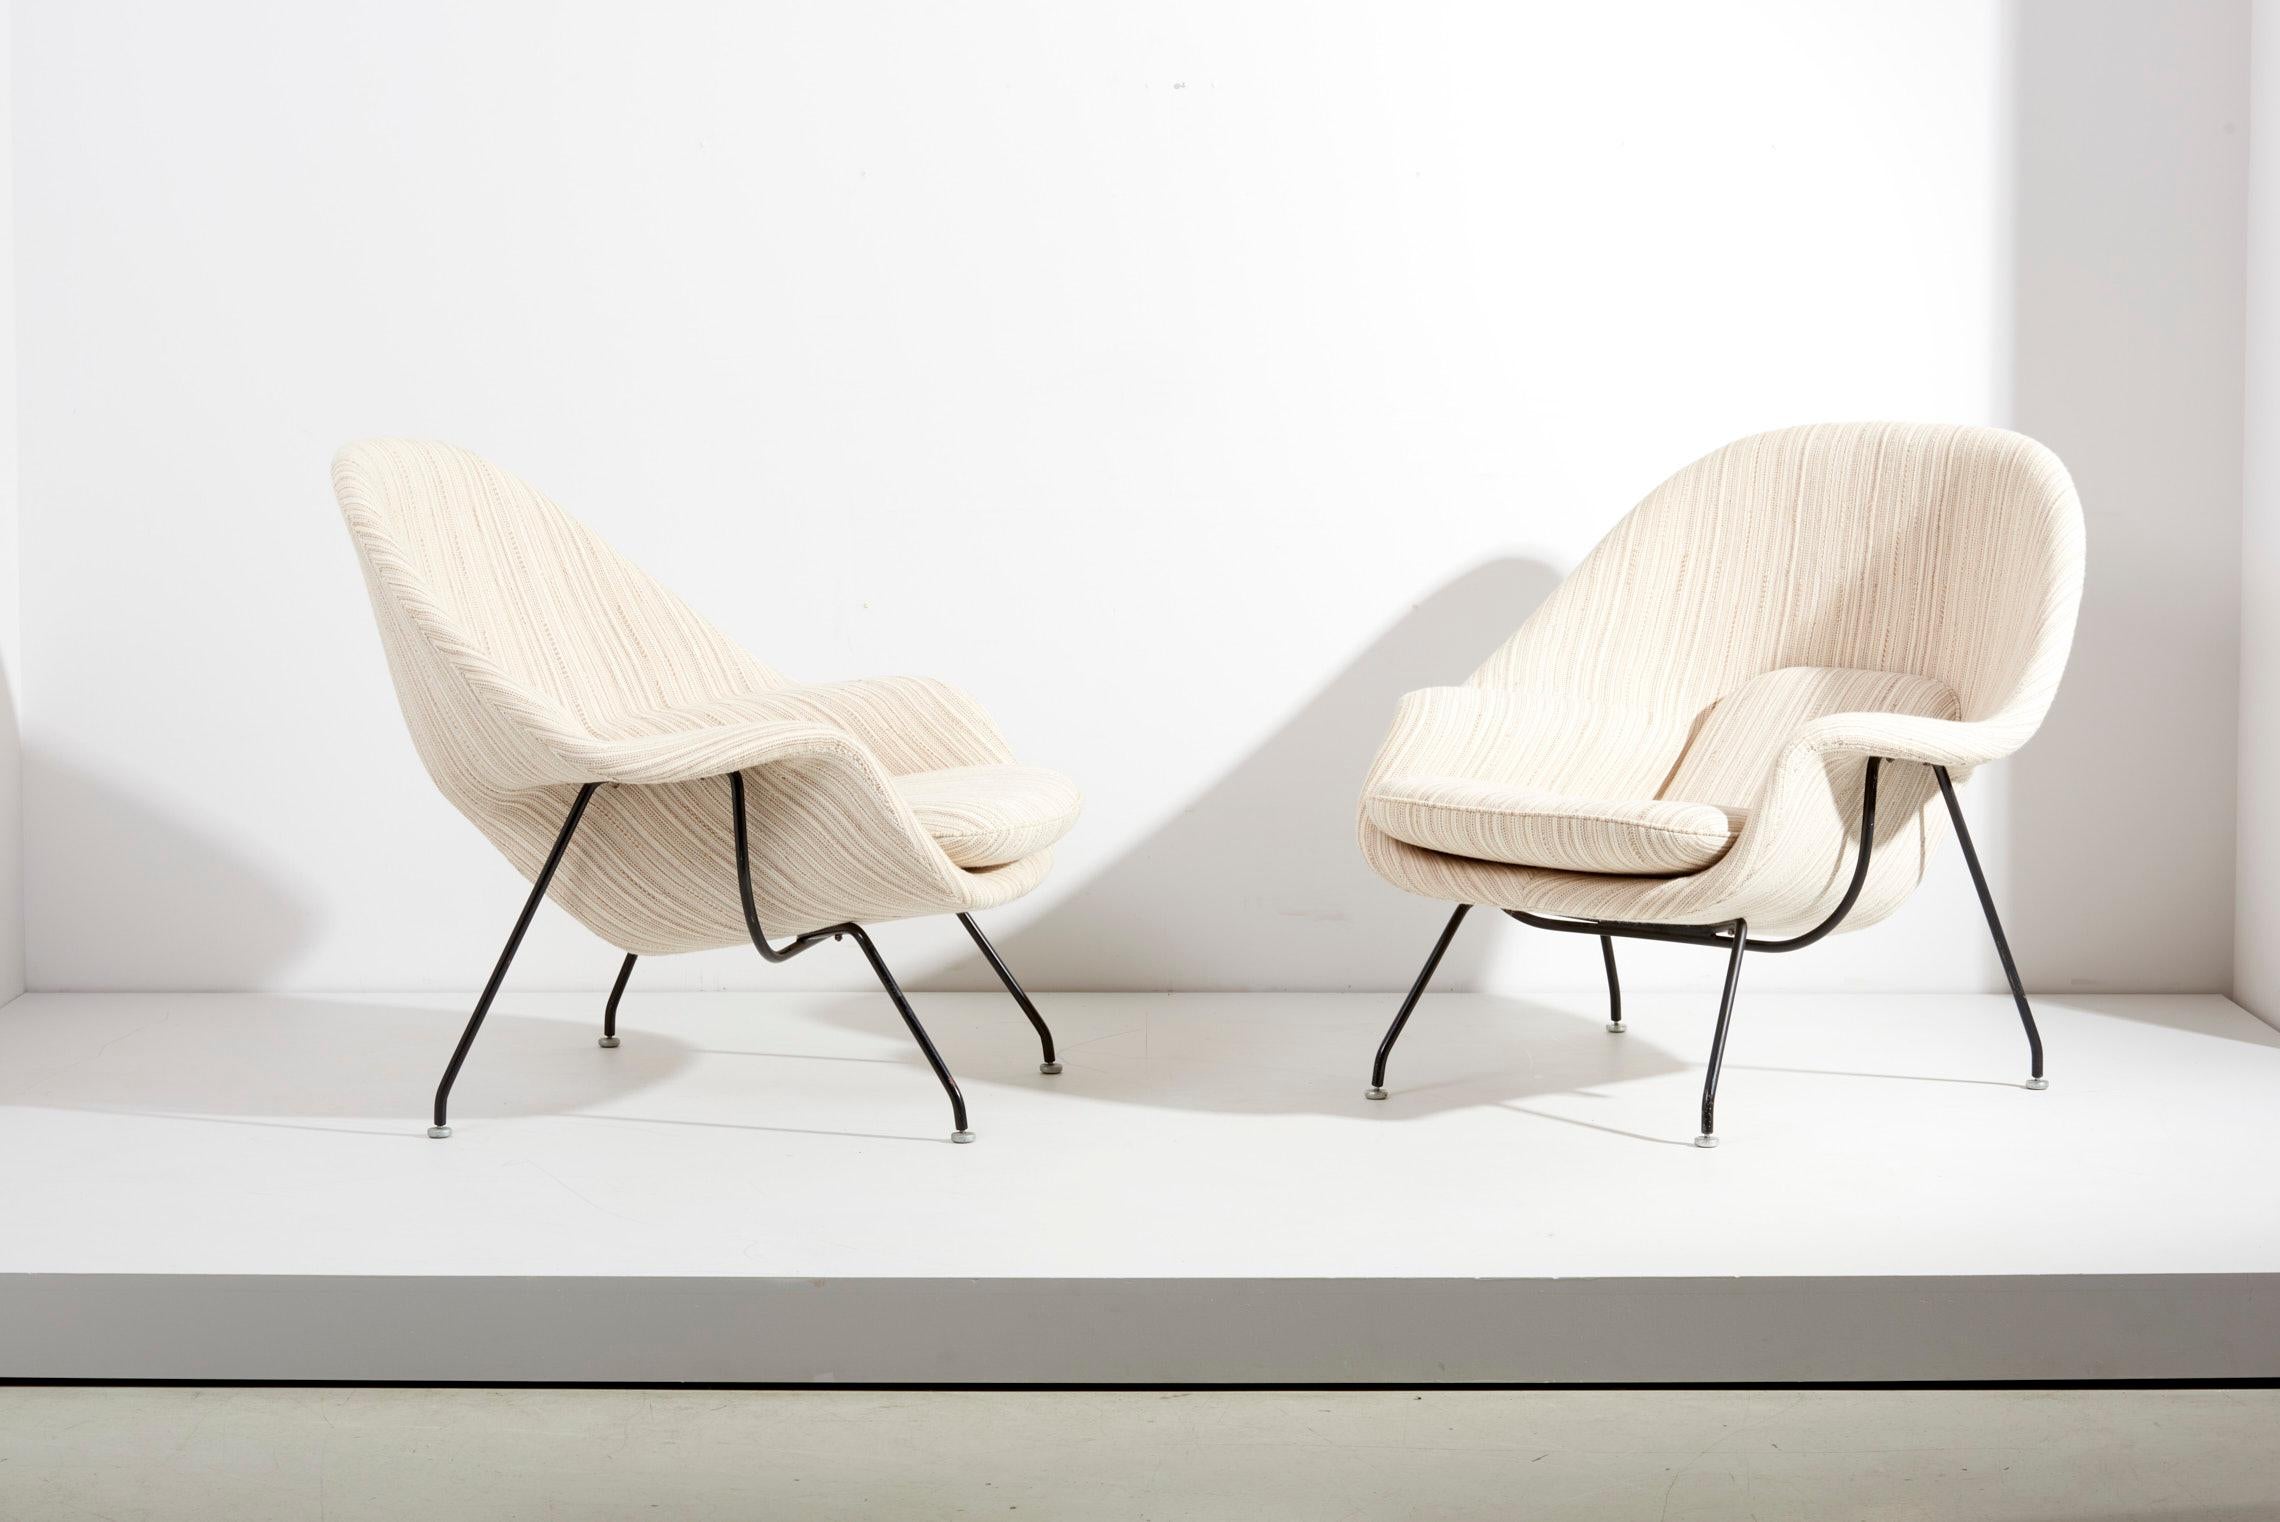 Set of two Early Eero Saarinen womb chairs and ottoman for Knoll, USA - 1960s. Newly upholstered in a Knoll fabric. The measurements given apply to the chair. The ottoman measures 55cm in depth, 70cm in width and 40cm in height. 
Upholstered in